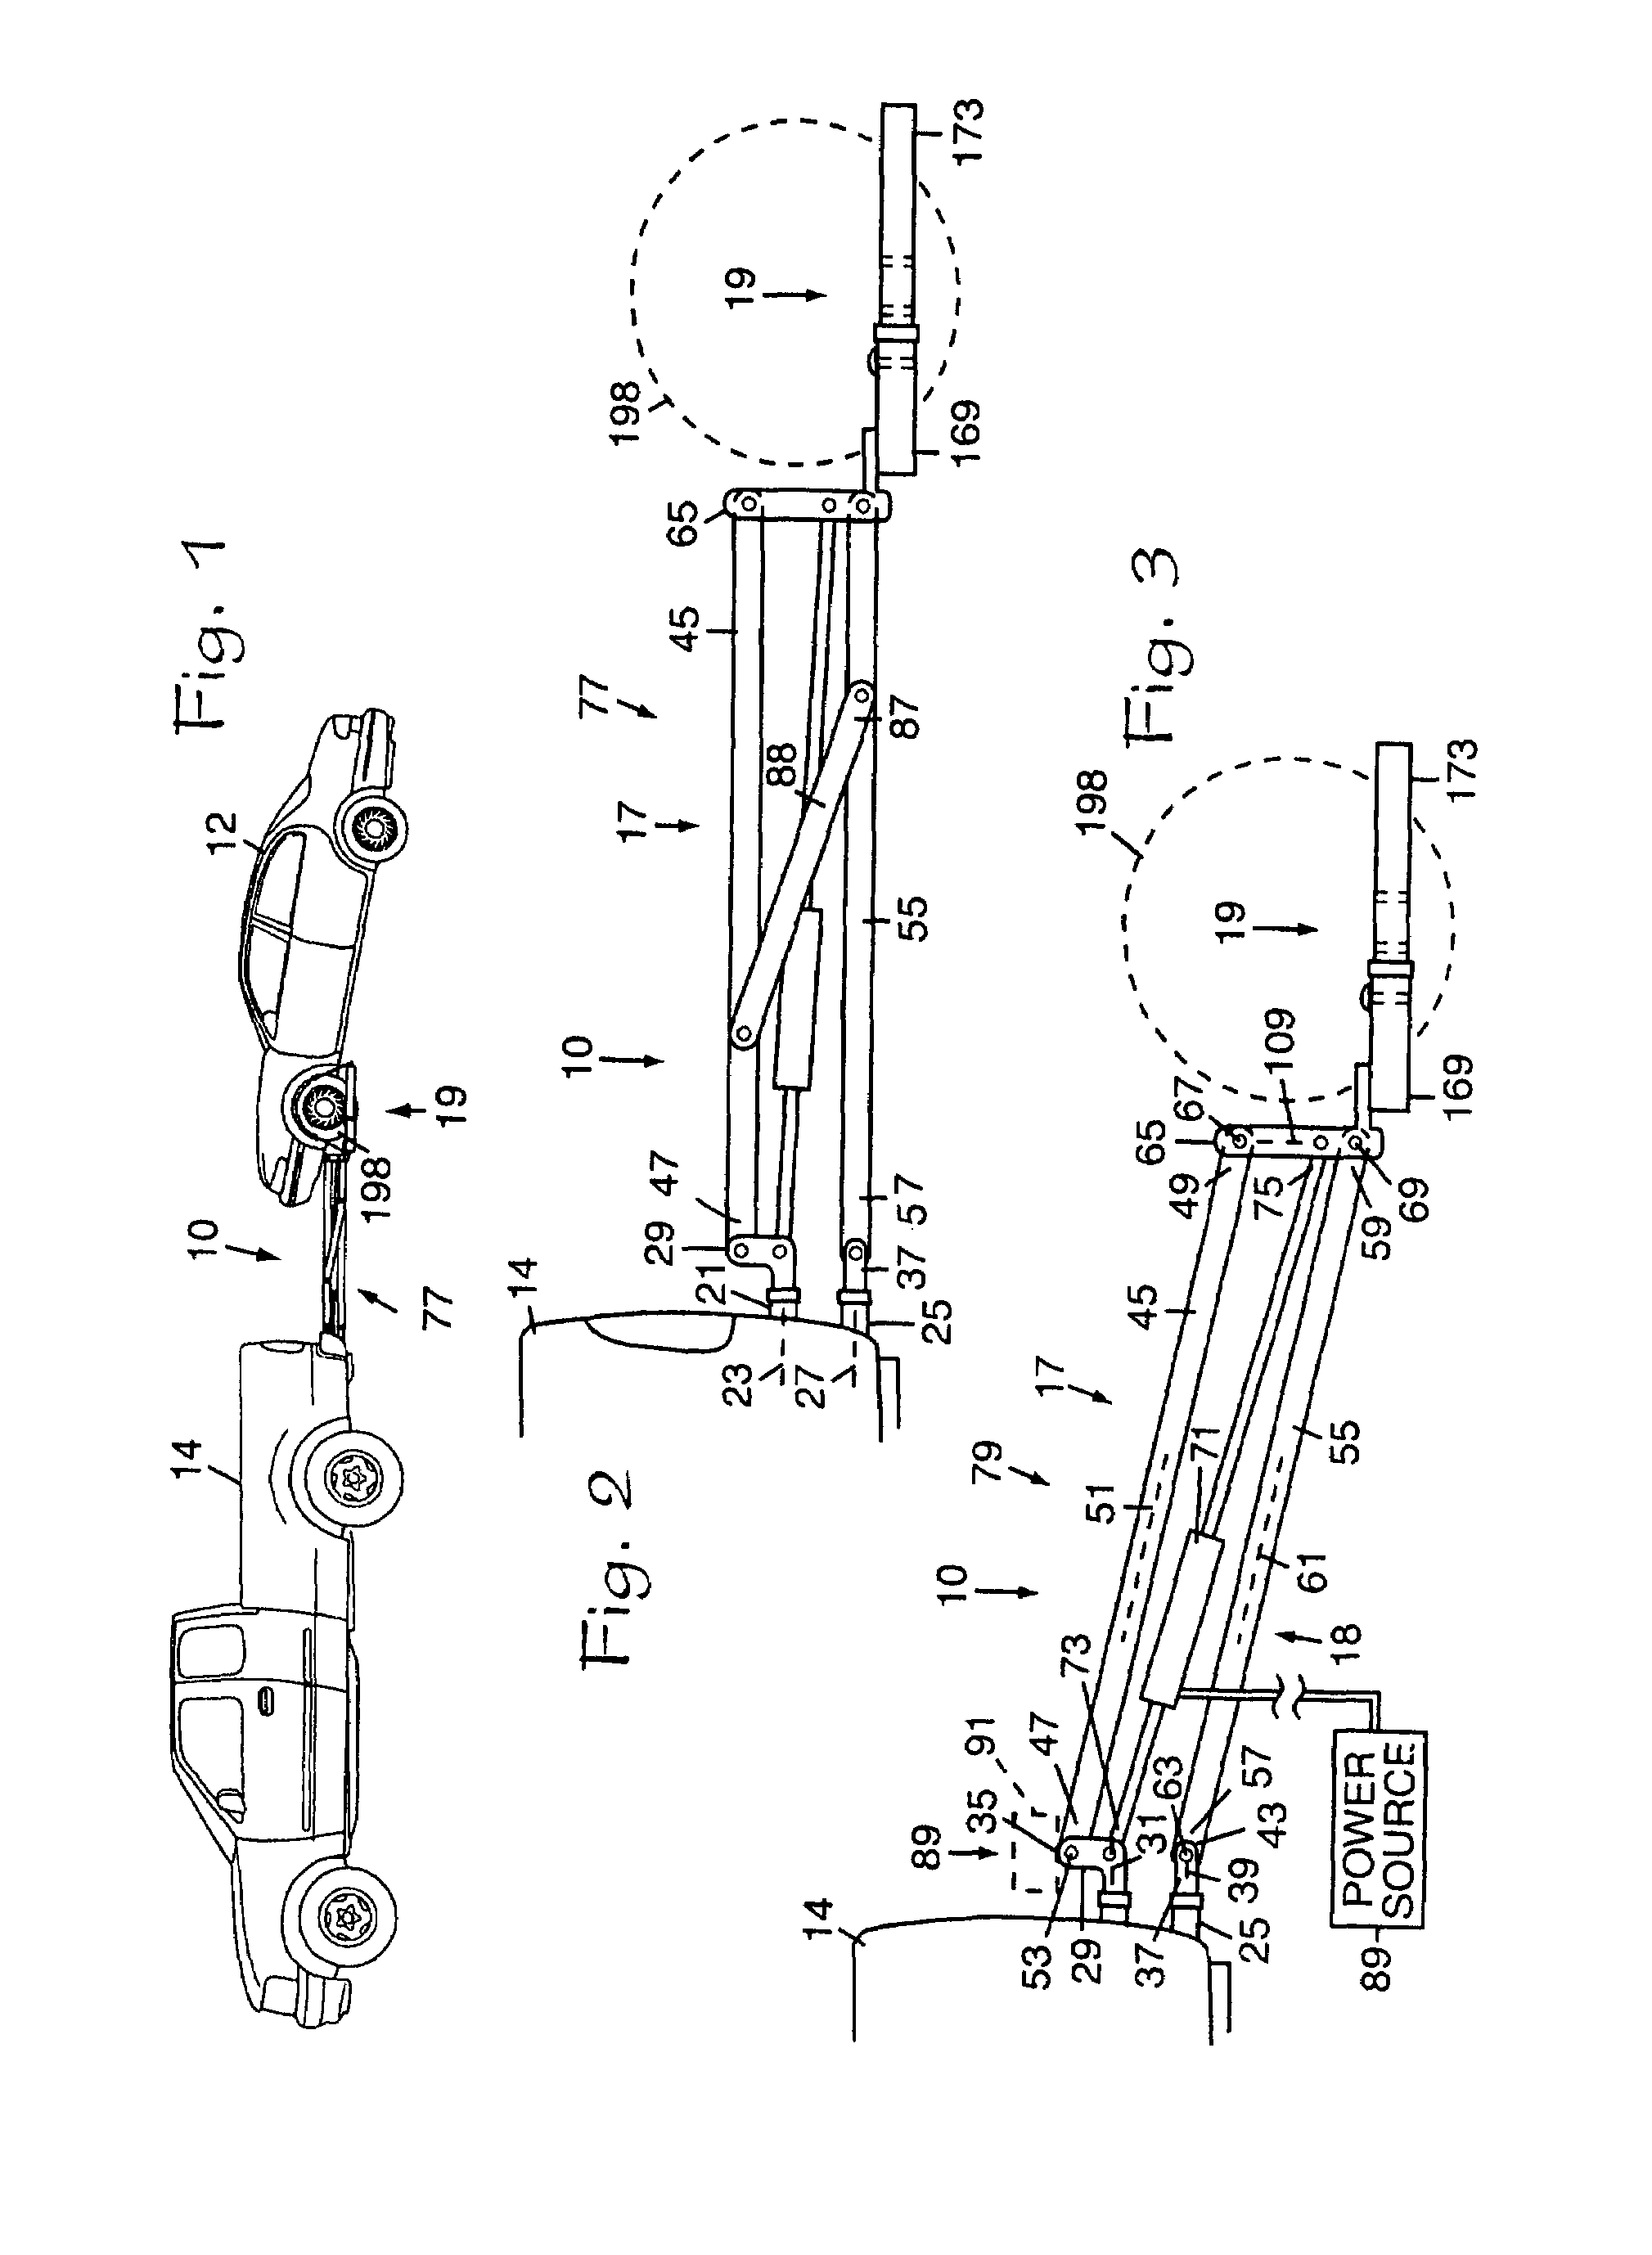 Lift/transporter for small vehicle